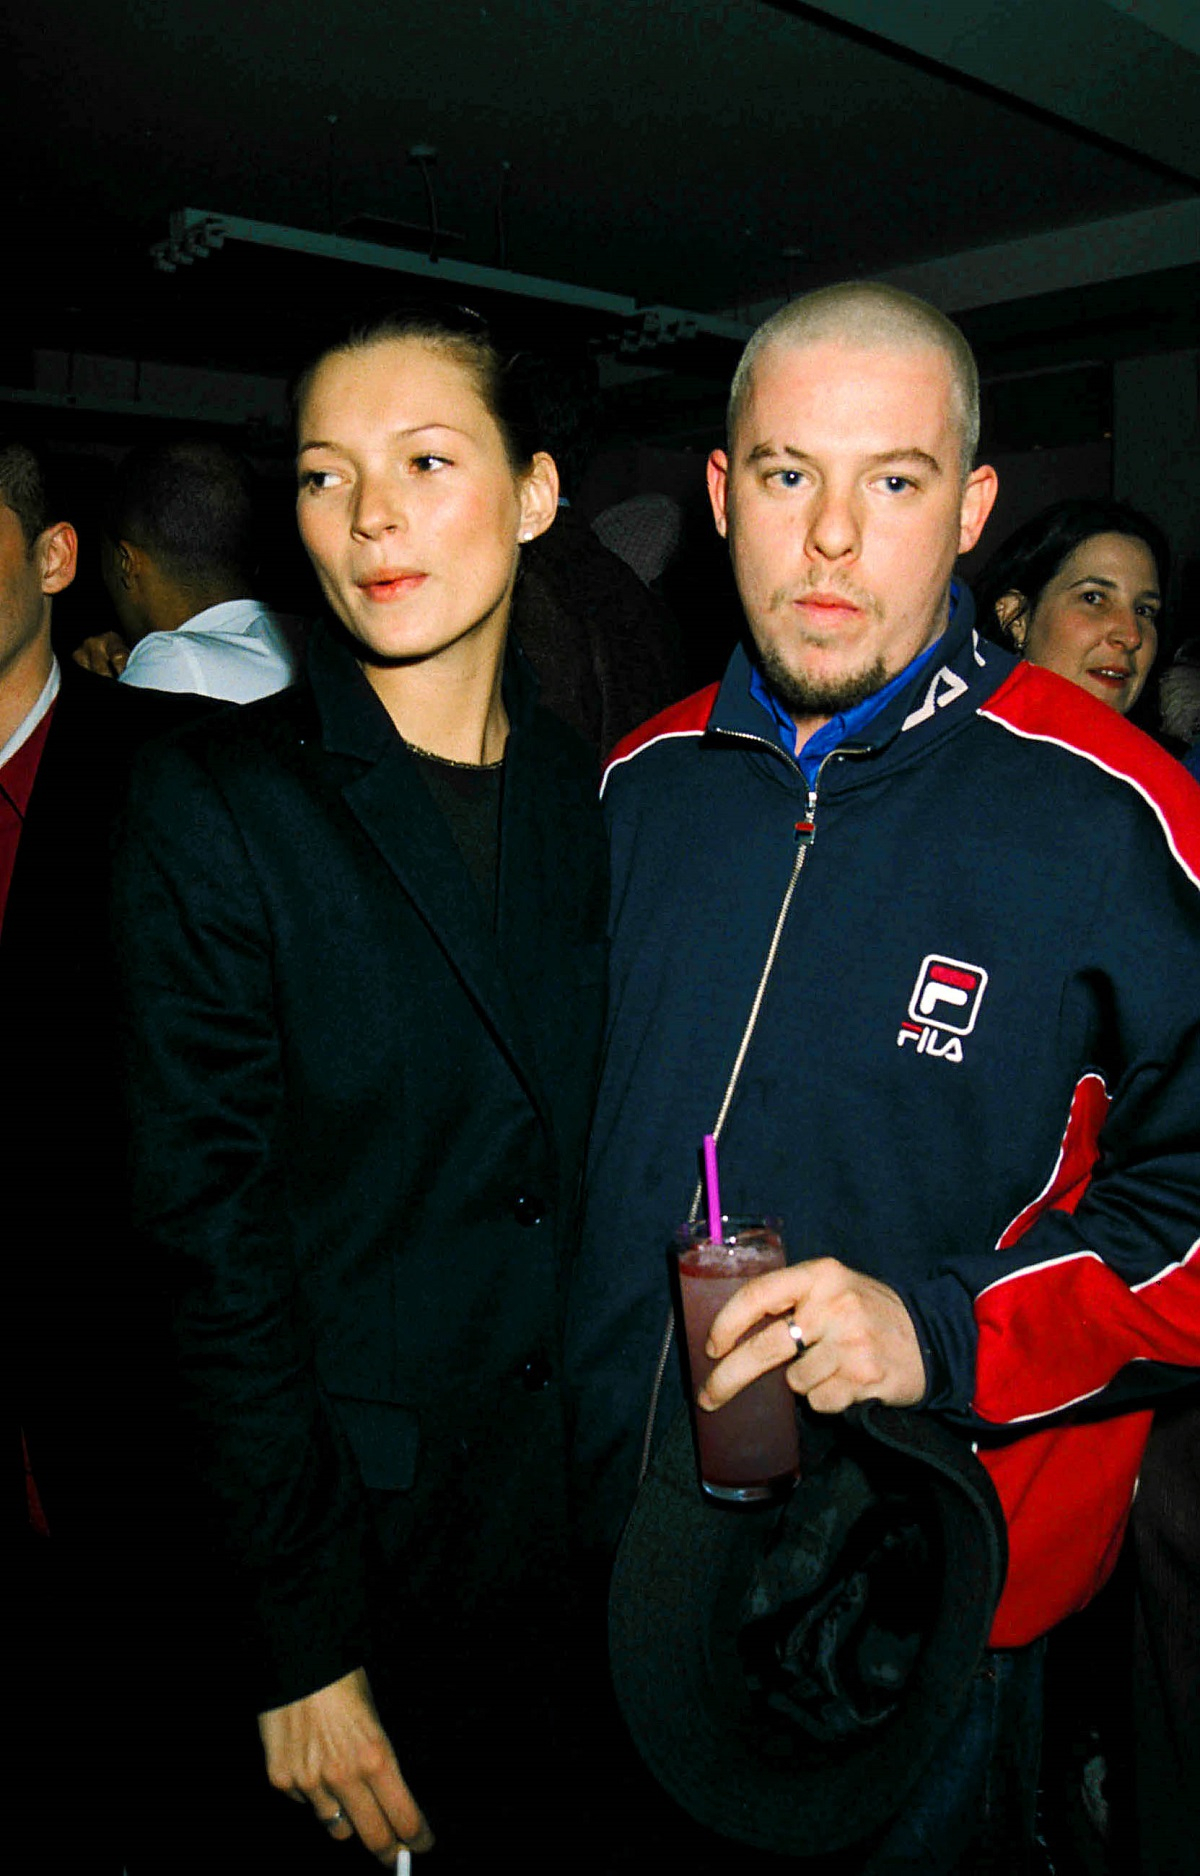 Kate Moss and Alexander McQueen hanging out at Damian Hirsts  Pharmacy Club in Londons Notting Hill Gate